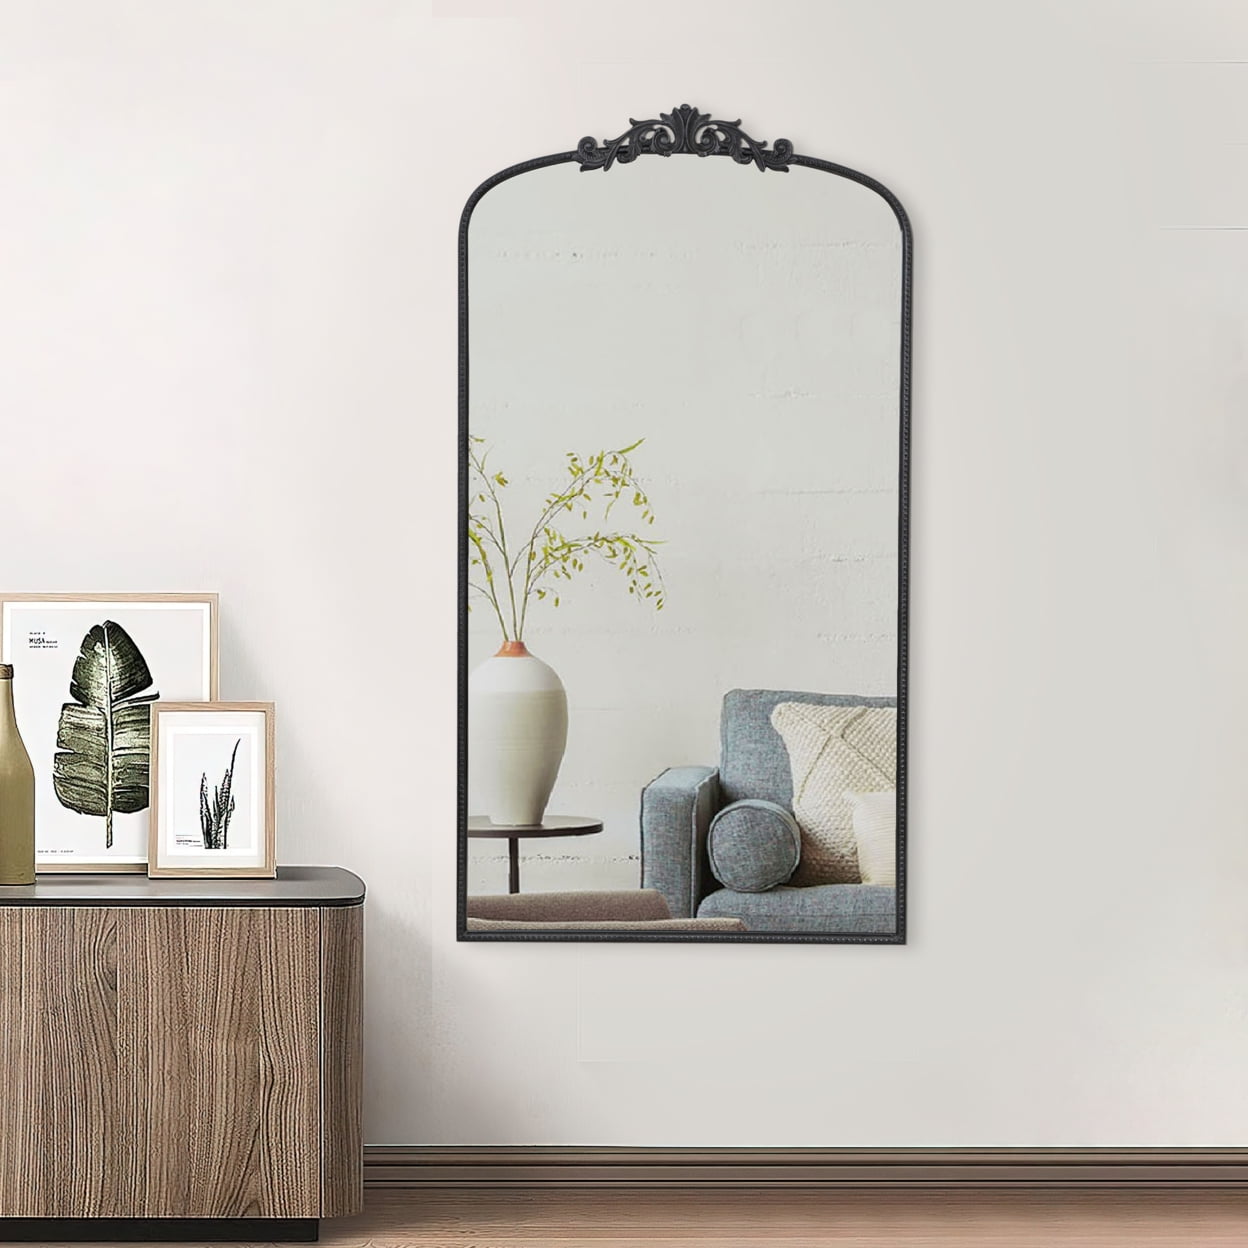 Picture of Benjara BM286125 66 in. Kea Wall Mirror with Curved Metal Frame, Ornate Baroque Design, Black